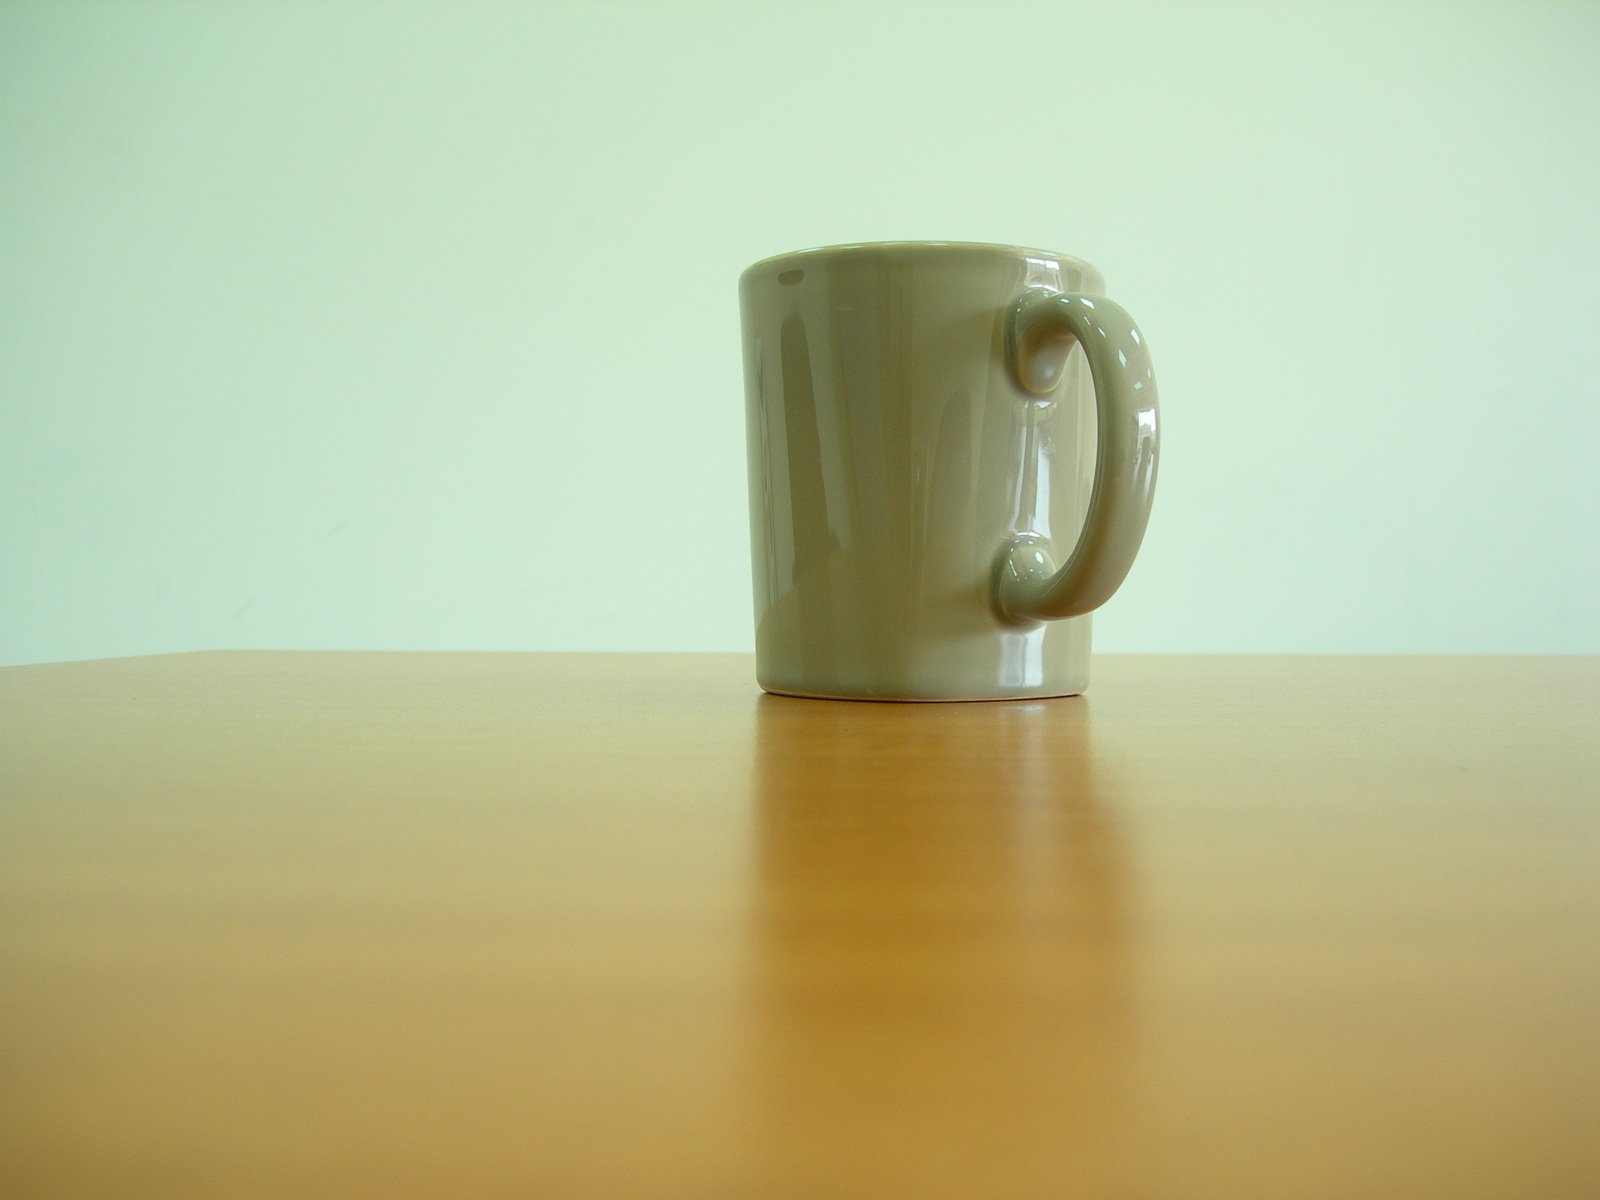 a close up of a coffee cup on a wooden table